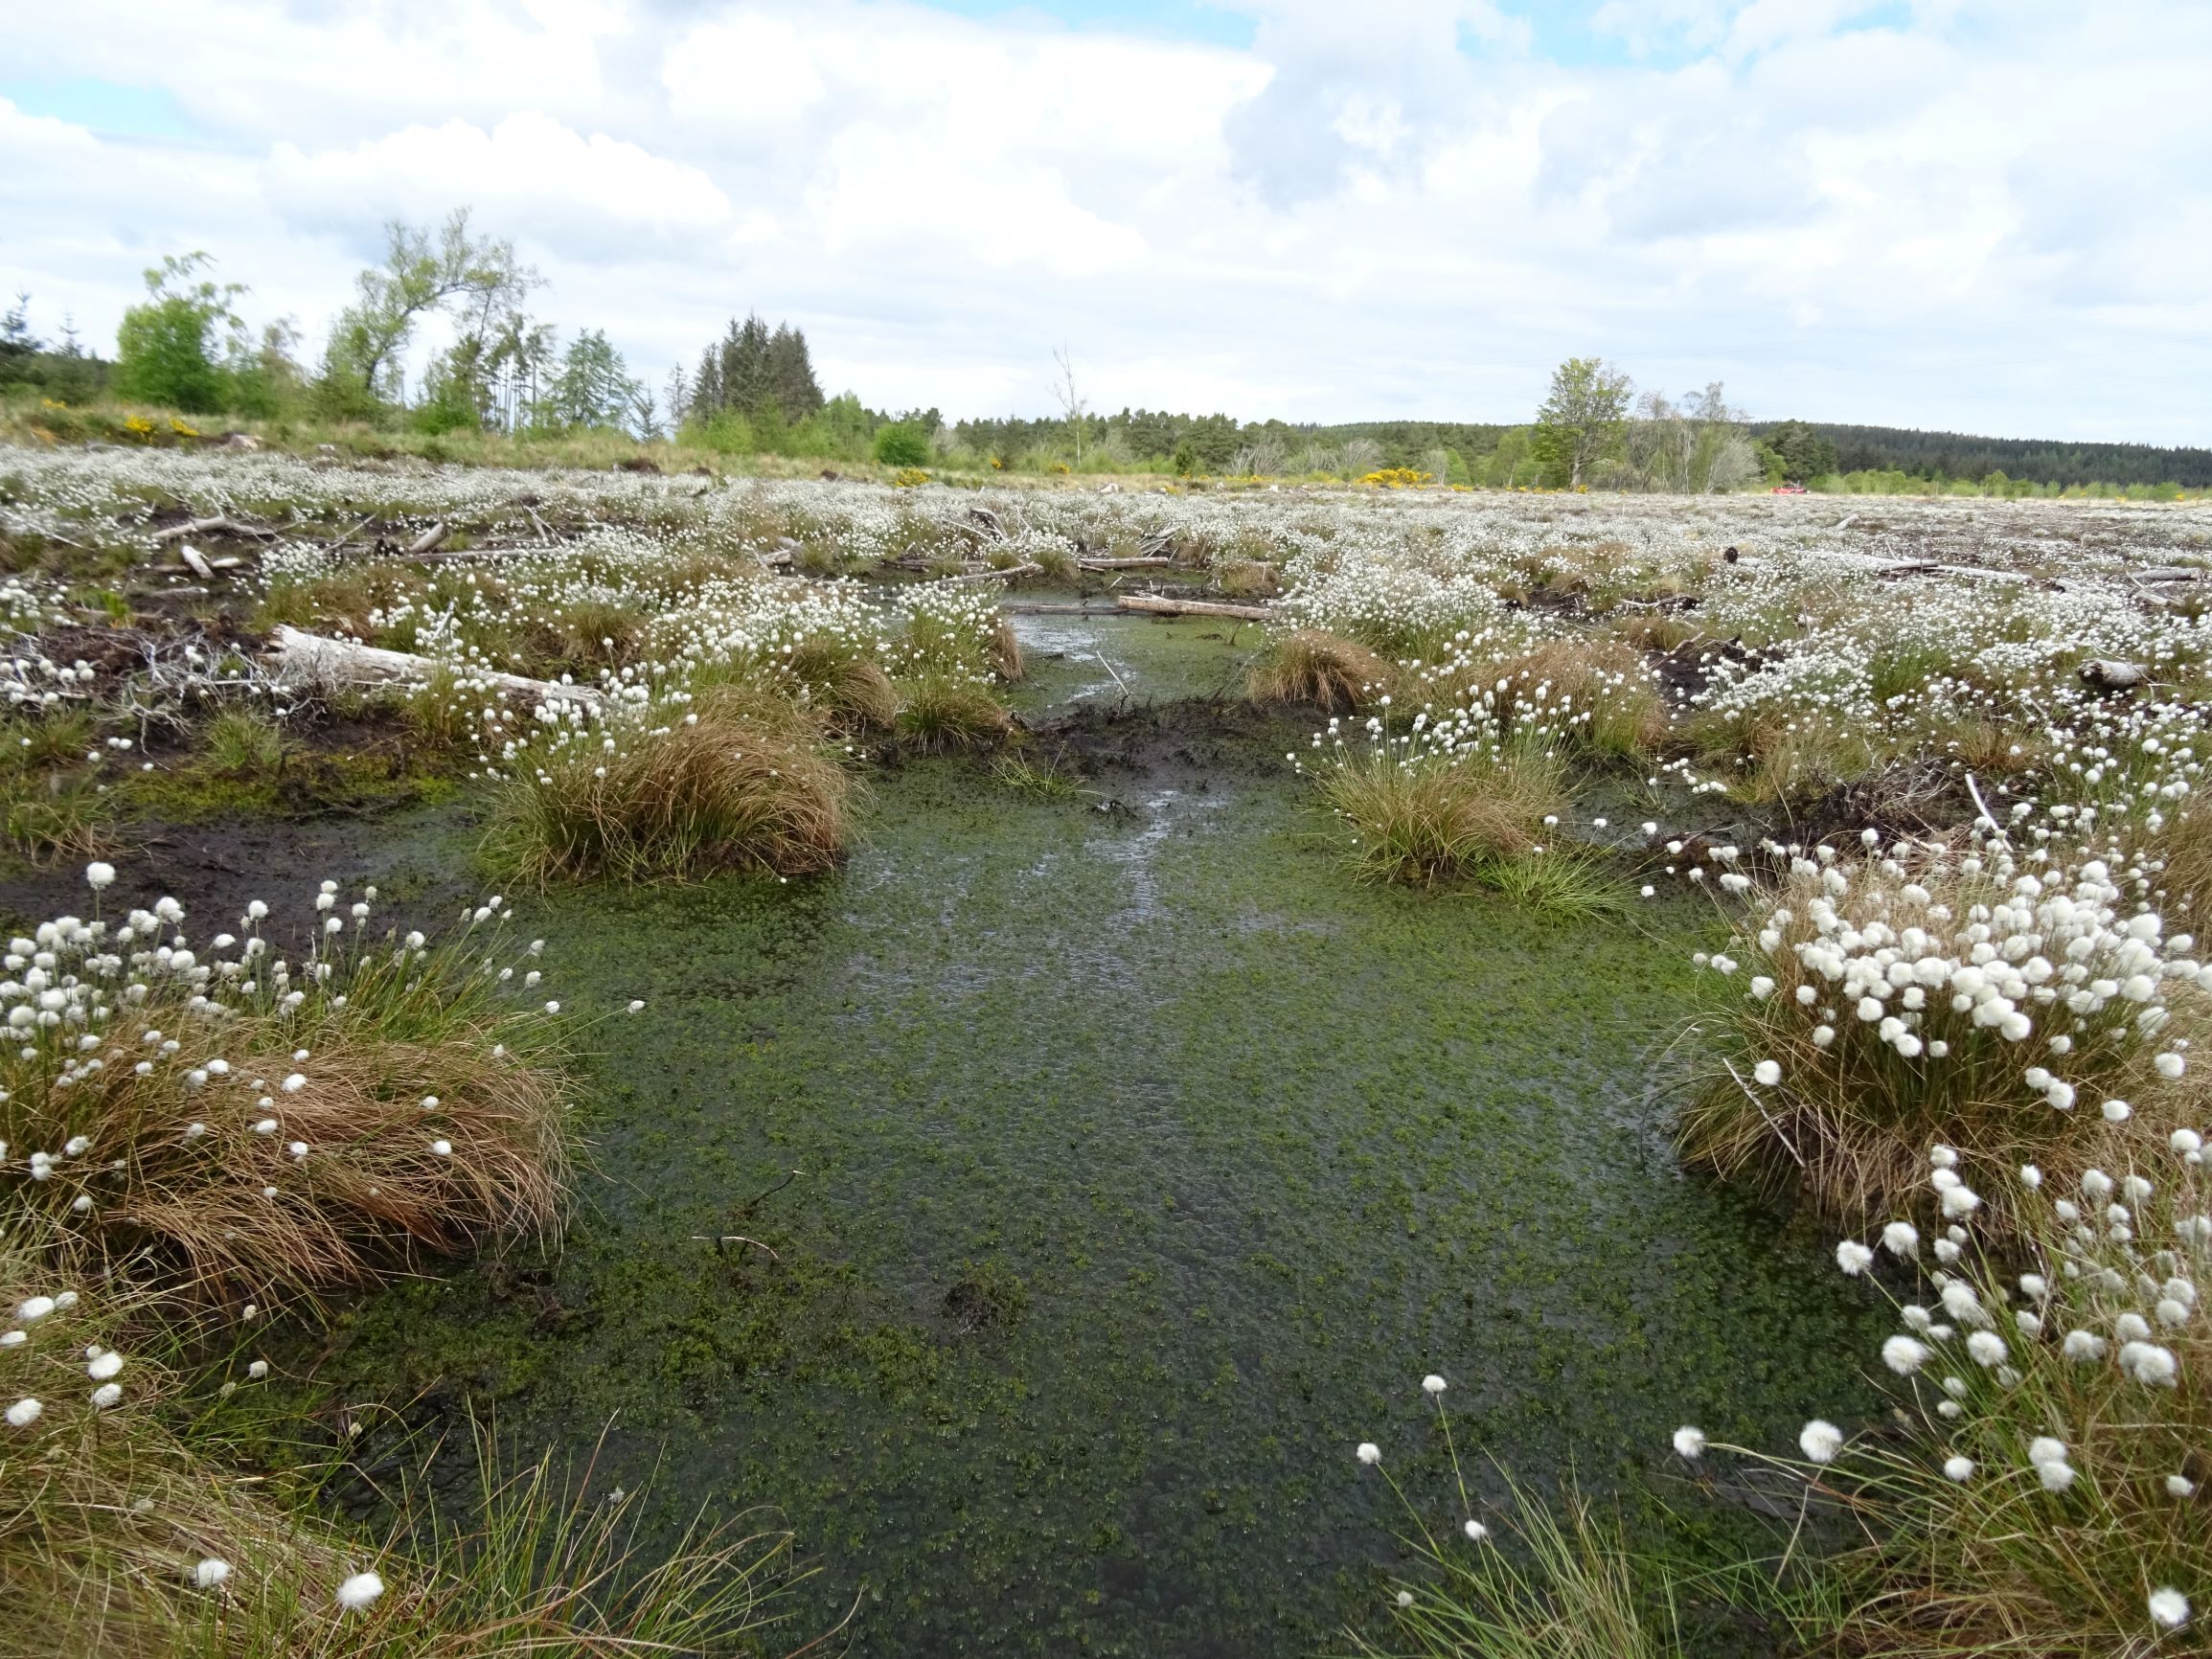 Boggy area with standing pools and tufts of wild white flowers and grasses